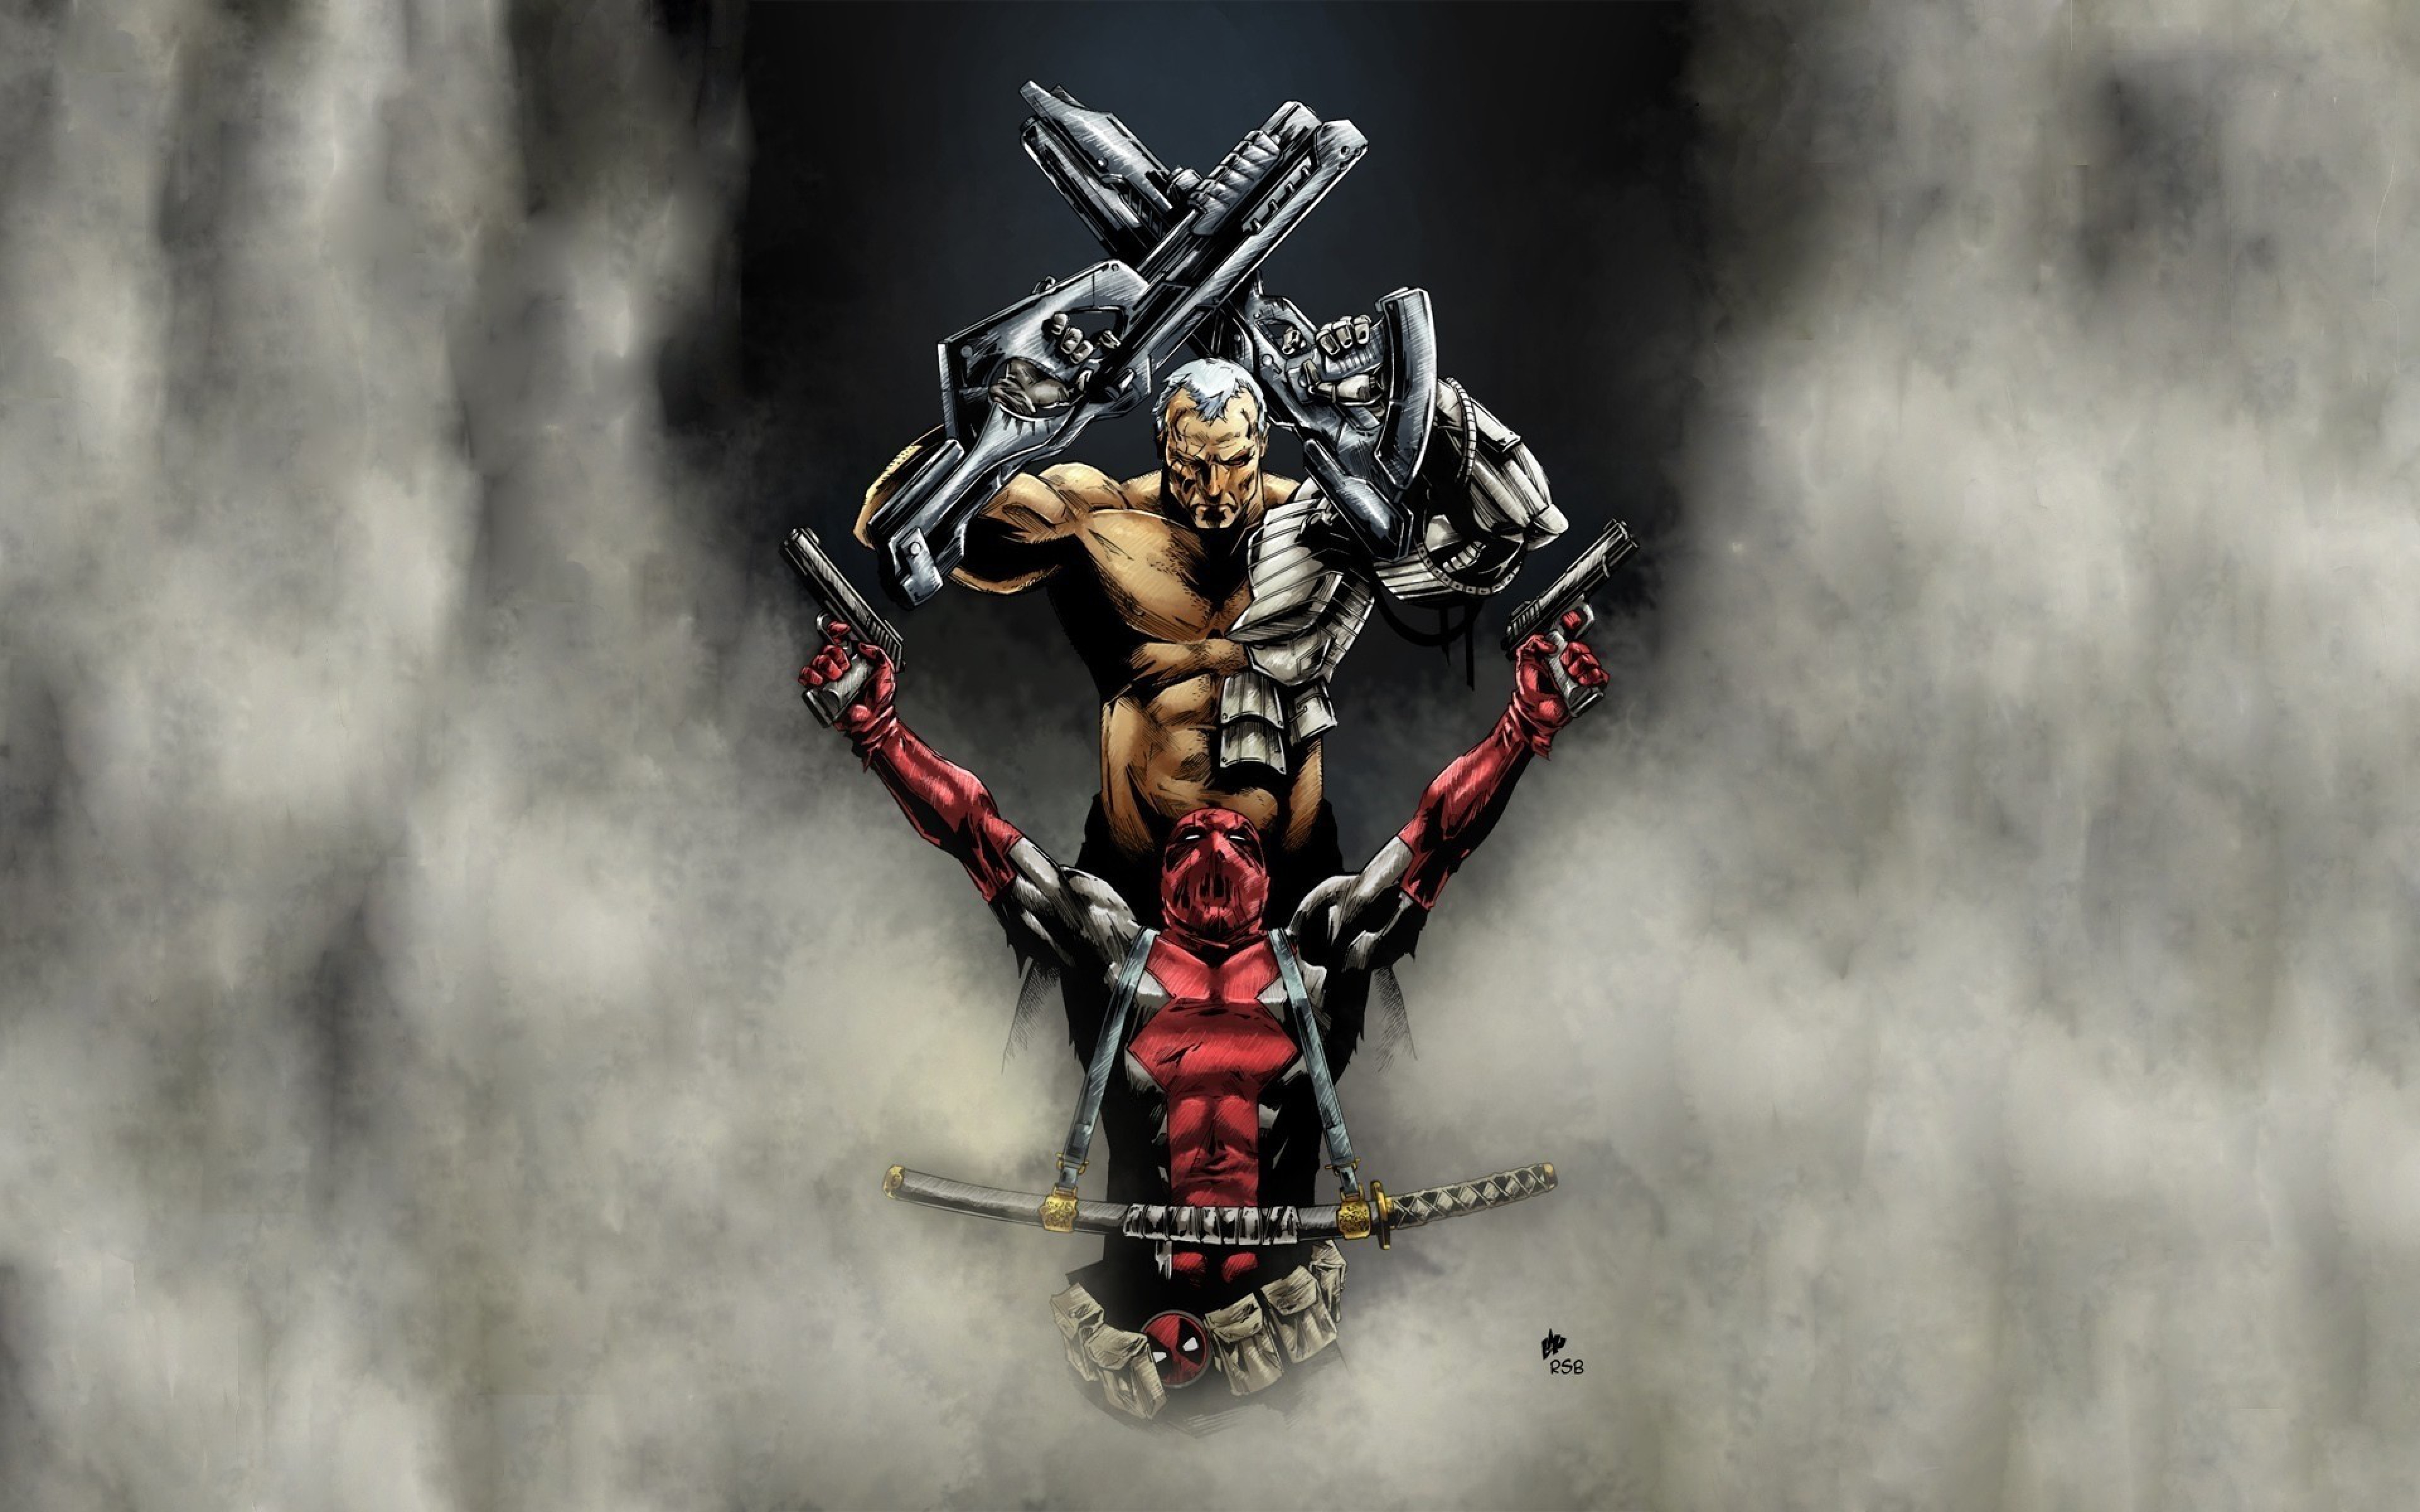 Wallpaper 3840x2400 Deadpool Weapon Cable Spiderman Superheroes 3840x2400